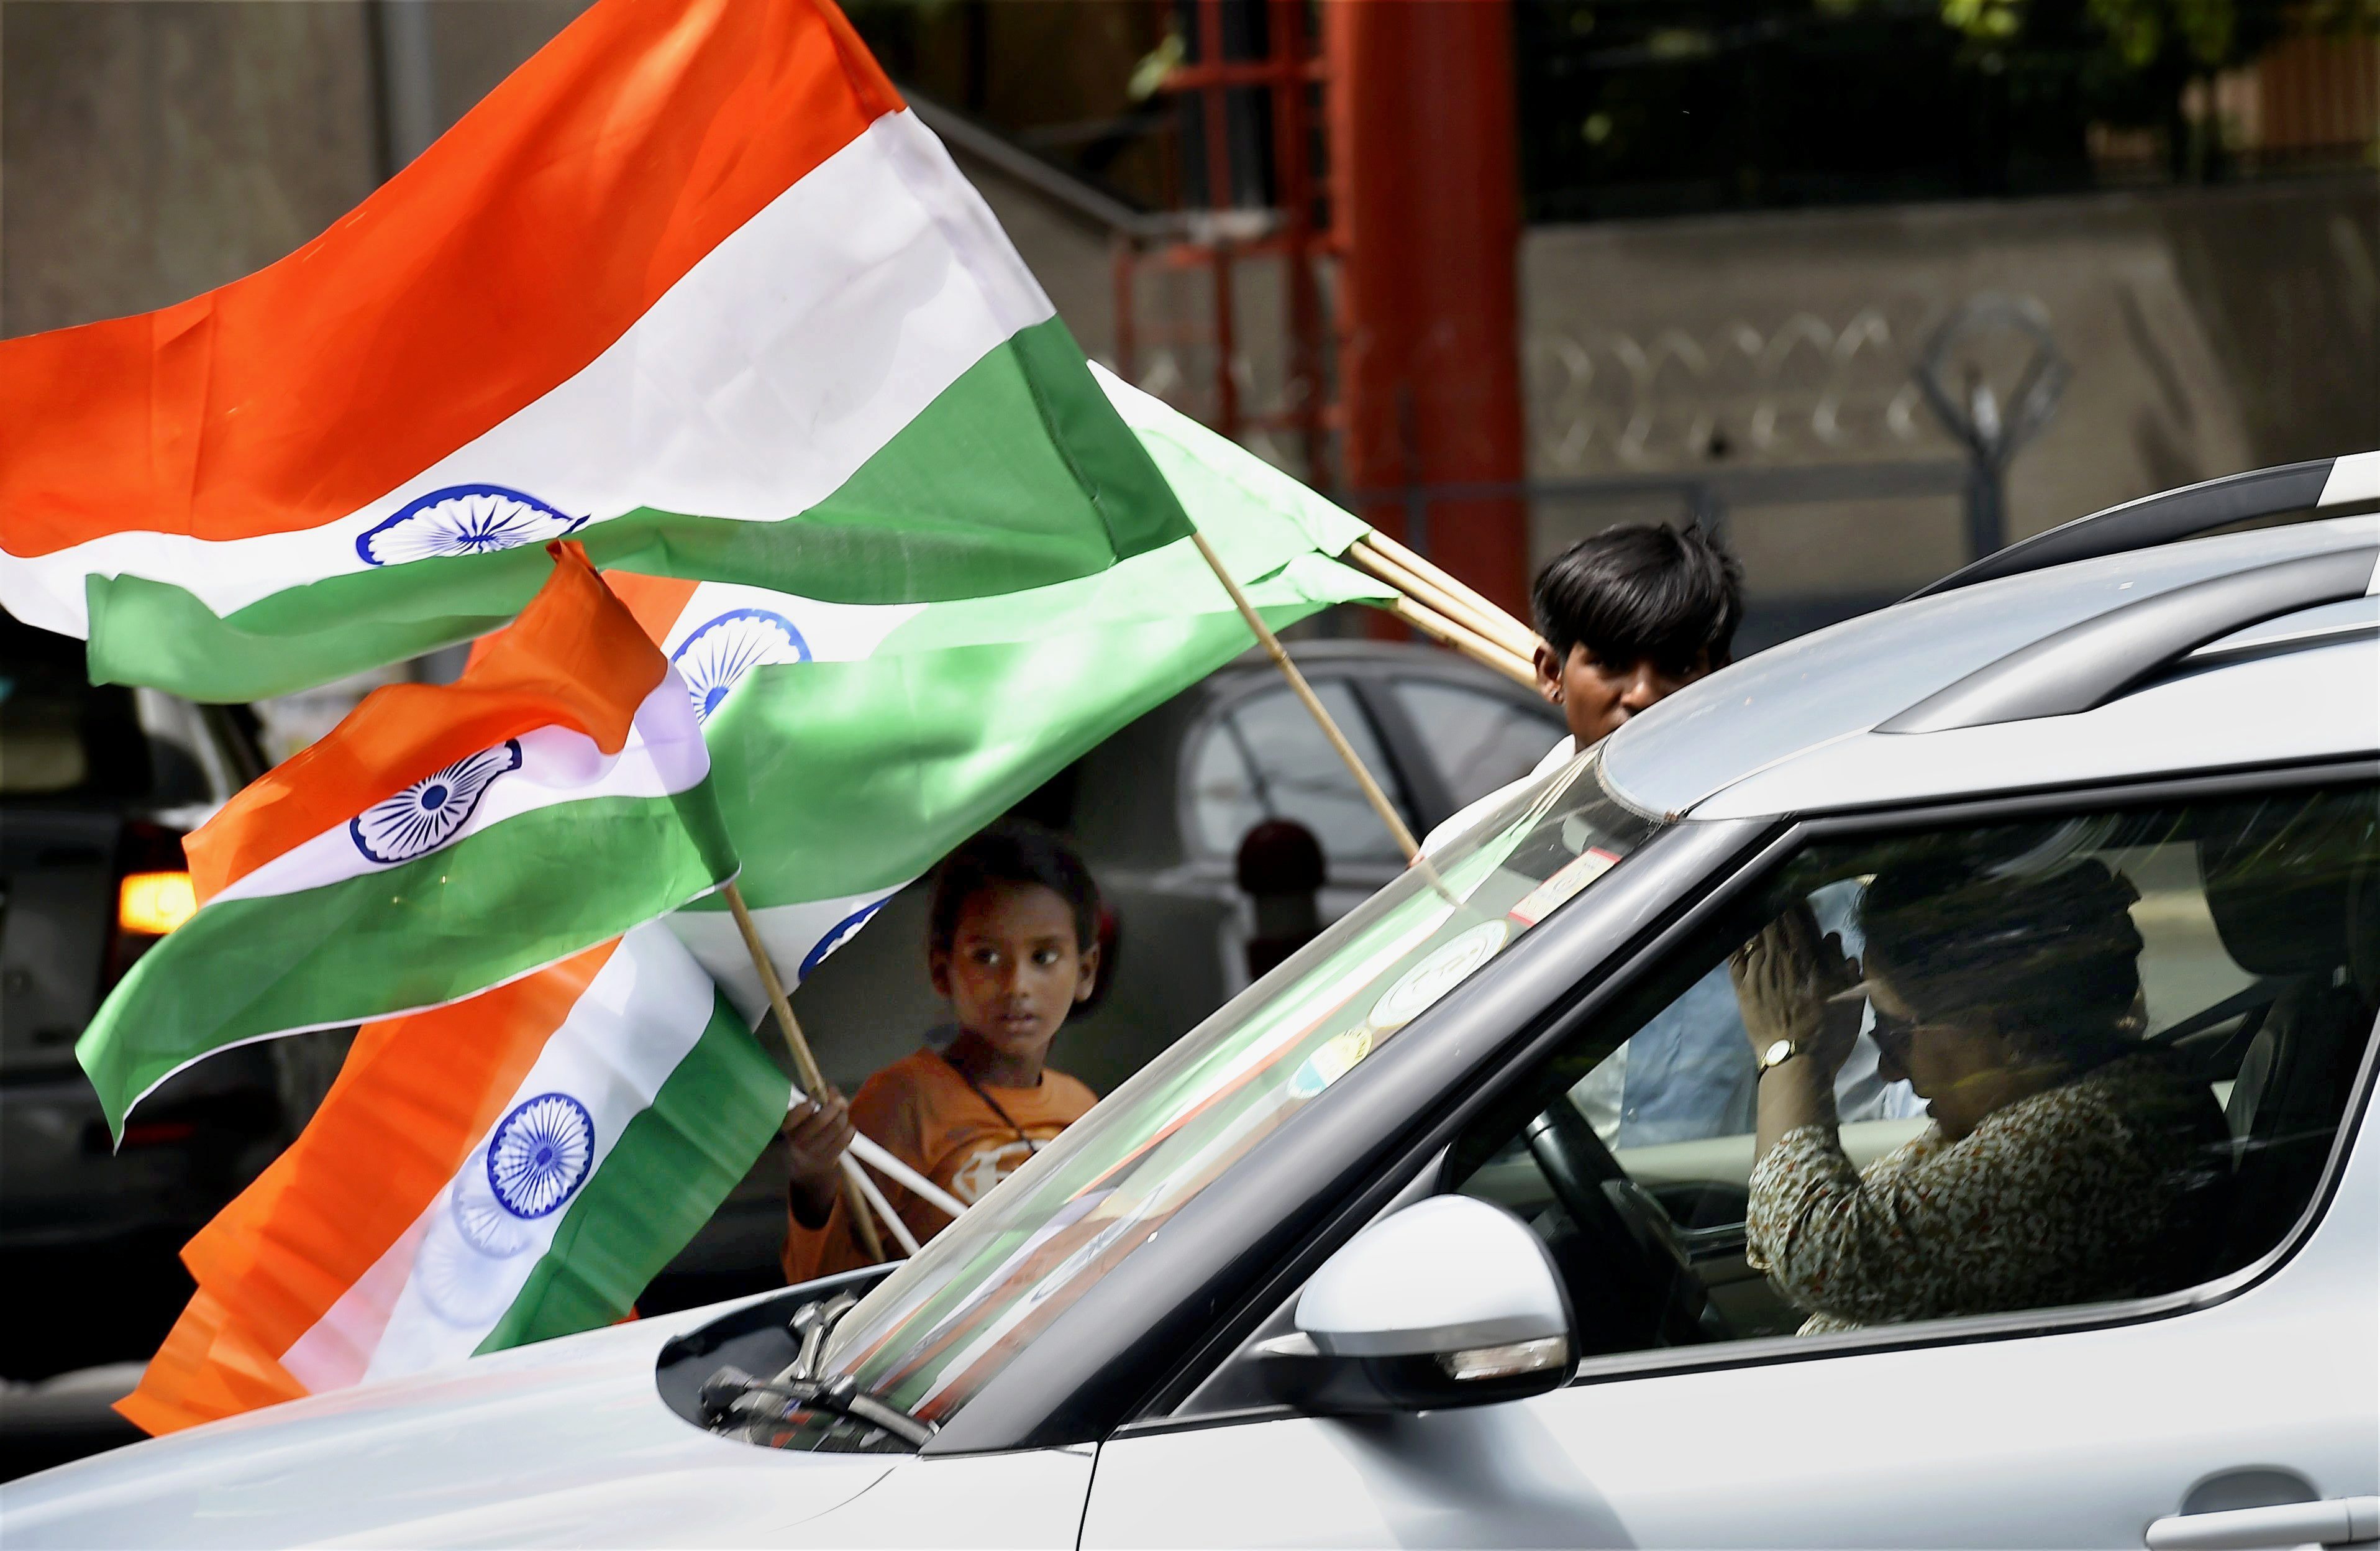 New Delhi: Vendors selling national flags on Sunday ahead of the Independence Day celebrations in New Delhi. PTI Photo by Kamal Singh(PTI8_13_2017_000066A)